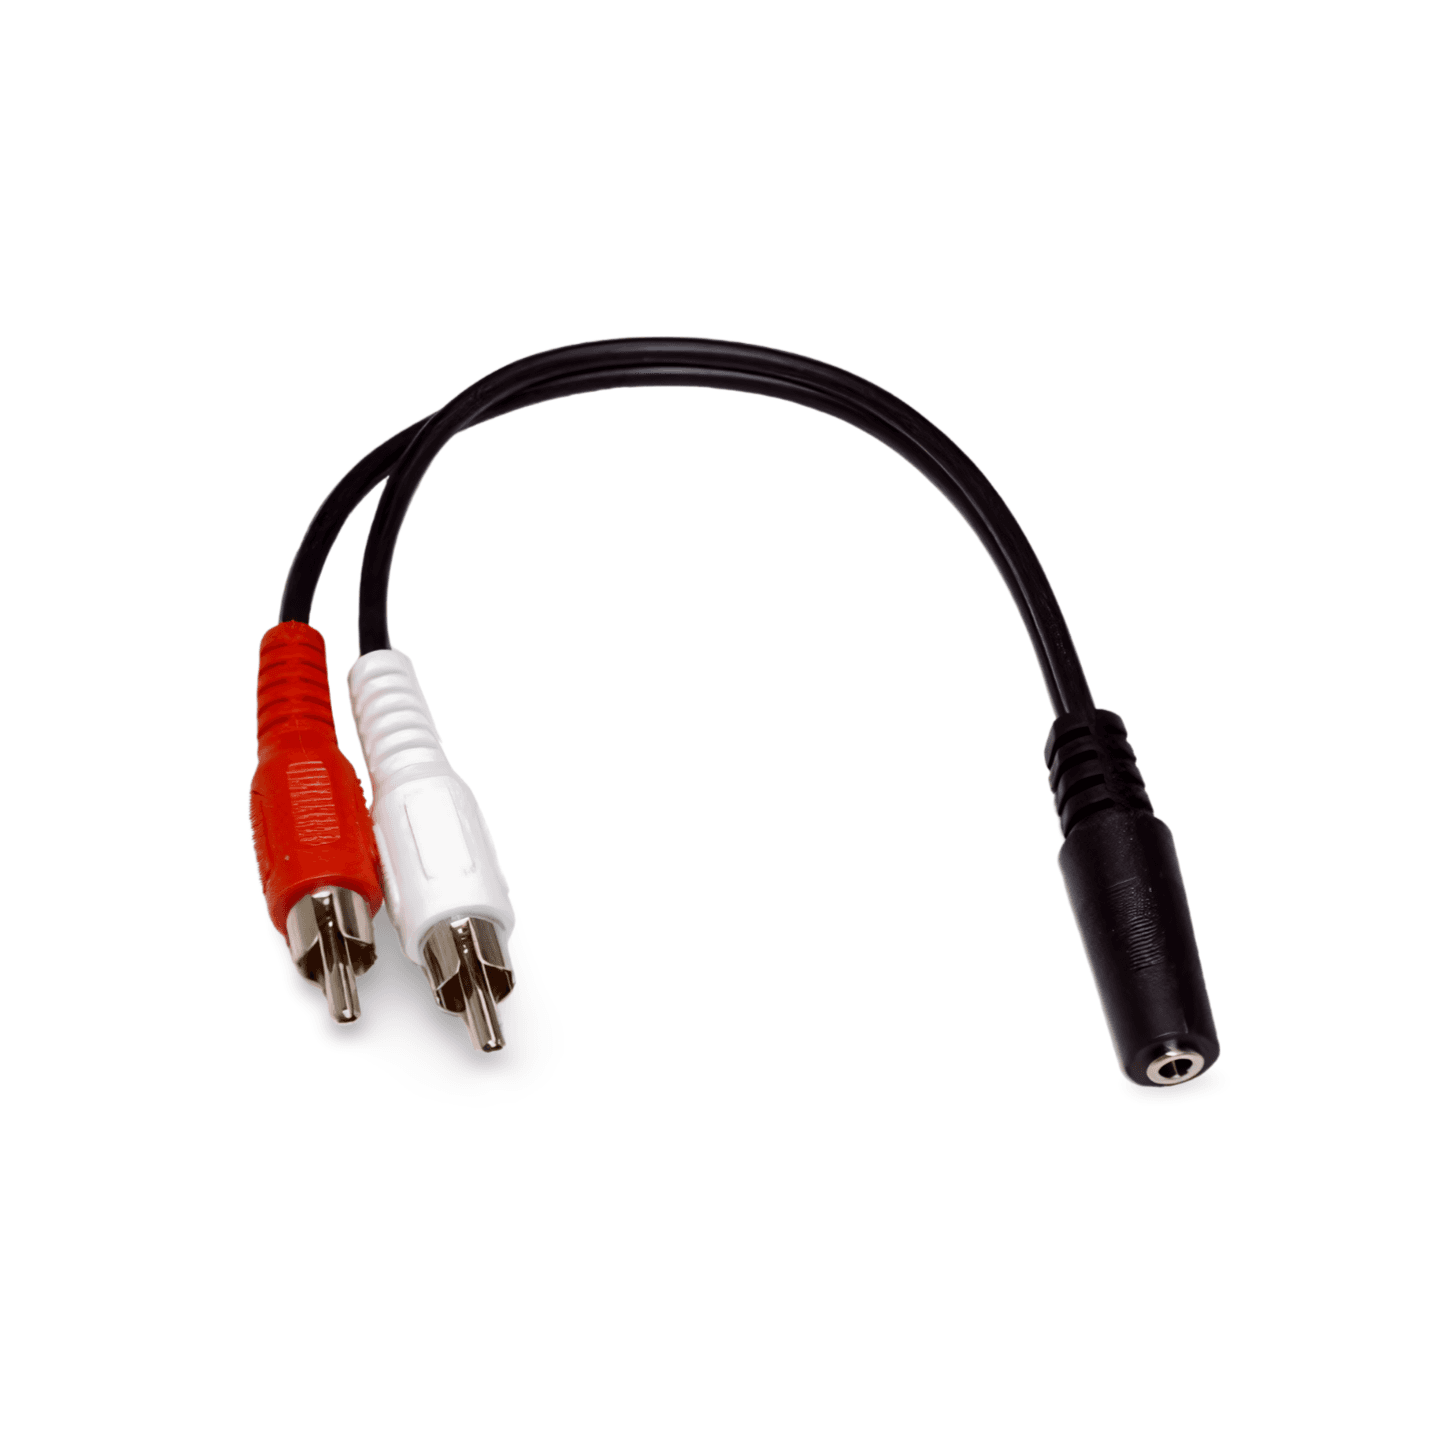 6in 3.5mm Stereo Jack Socket Female to 2 RCA Male Cable black